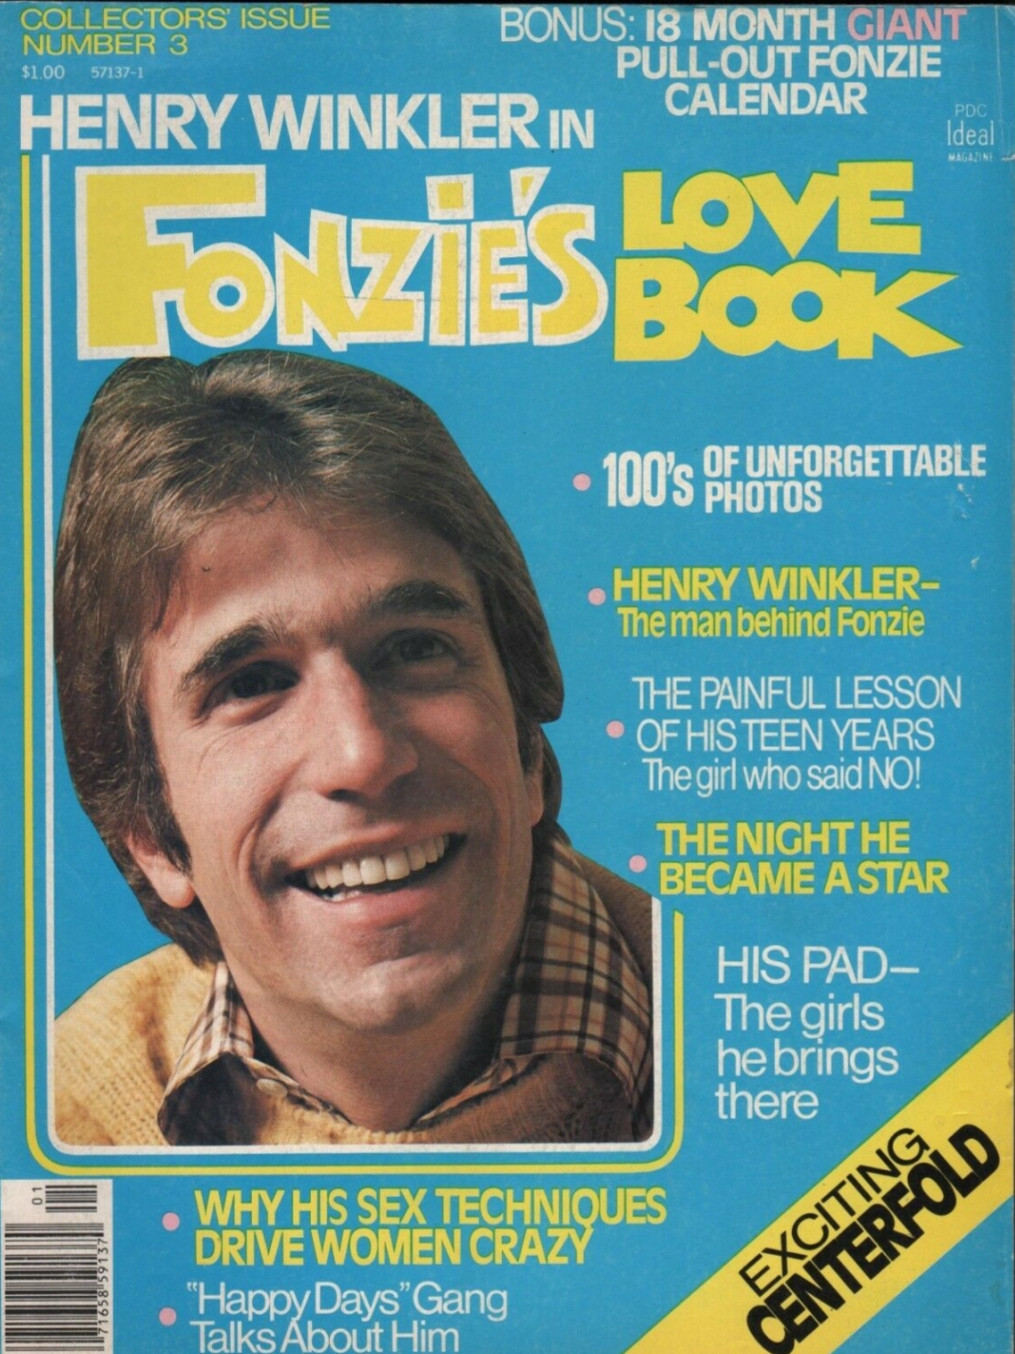 magazine - Numbers Issue Bonus 18 Month Giant PullOut Fonzie Henry Winkler In Calendar der Fonzies Bove 100's Pfunes 100% Of Unforgettable Henry Winkler The man behind Fonzie The Painful Lesson Of His Teen Years The girl who said No! The Night He Became A